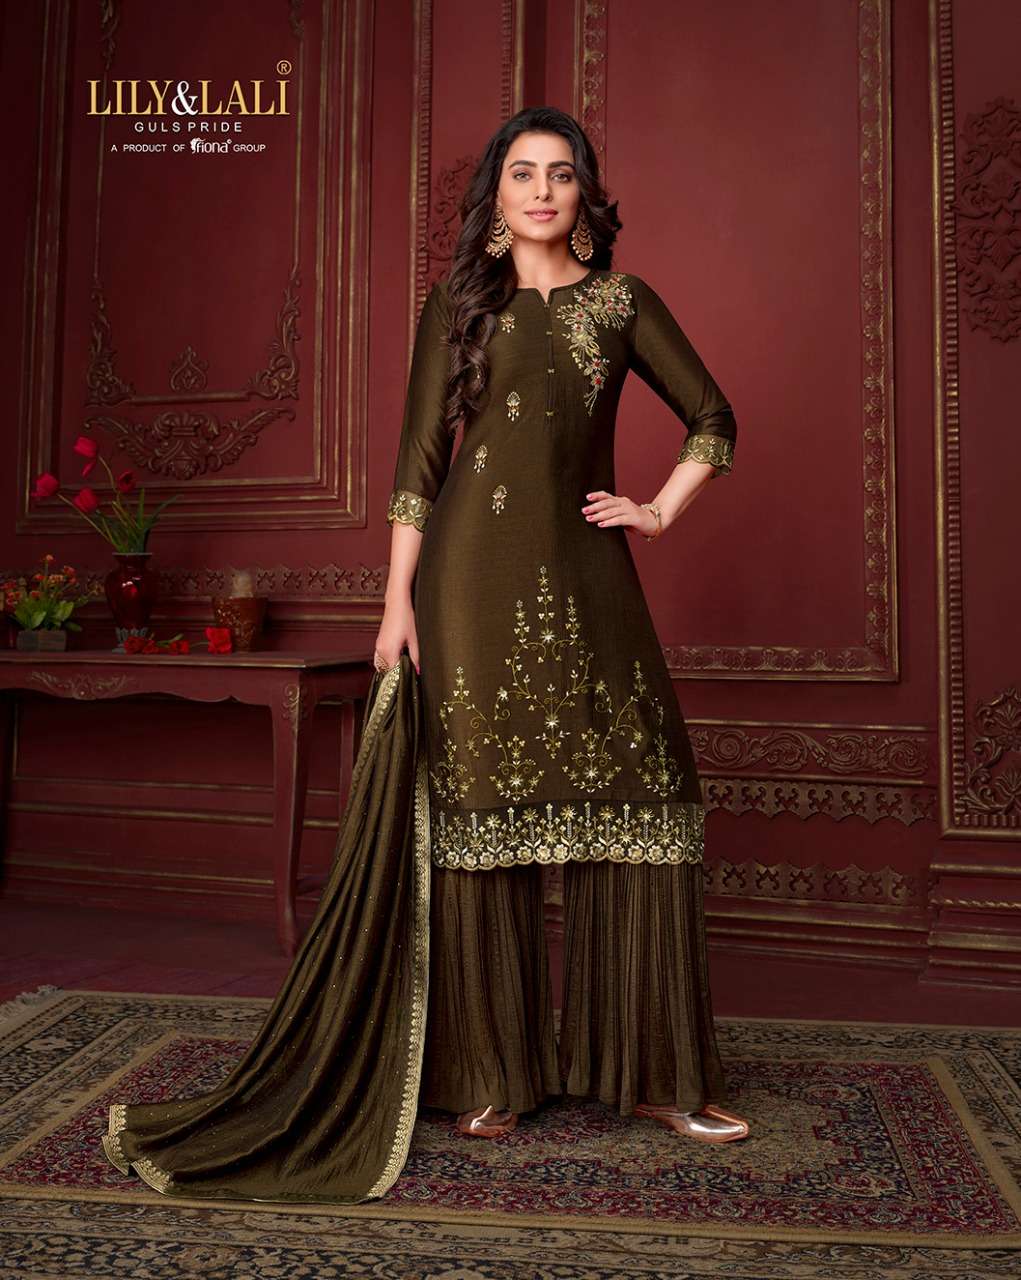 lily & lali malang 10191-10196 series silk designer exclusive ready made party wear suits online dealer surat